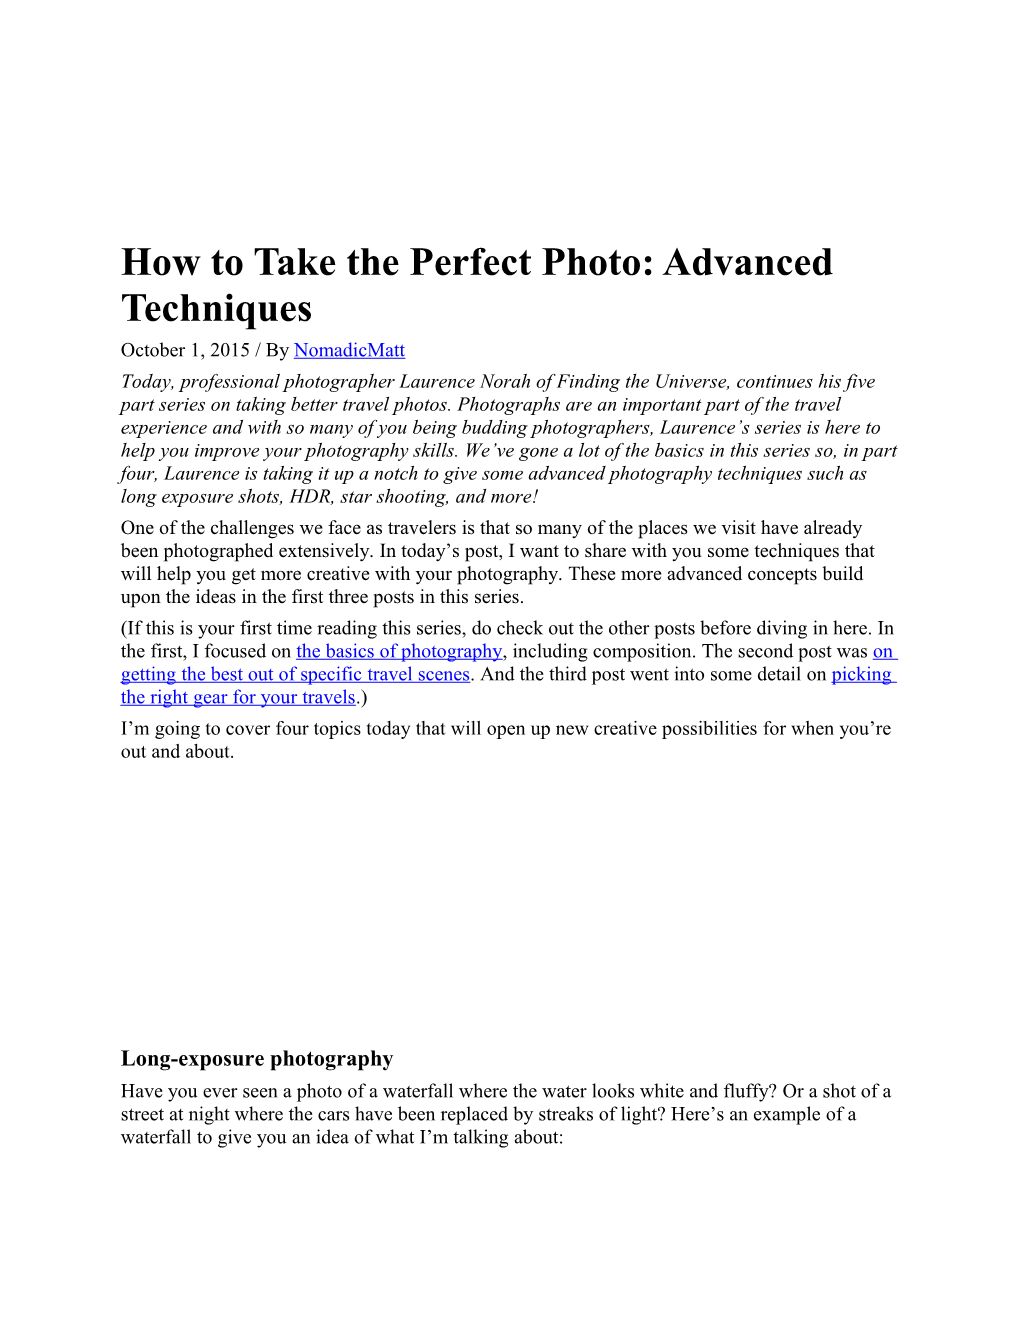 How to Take the Perfect Photo: Advanced Techniques